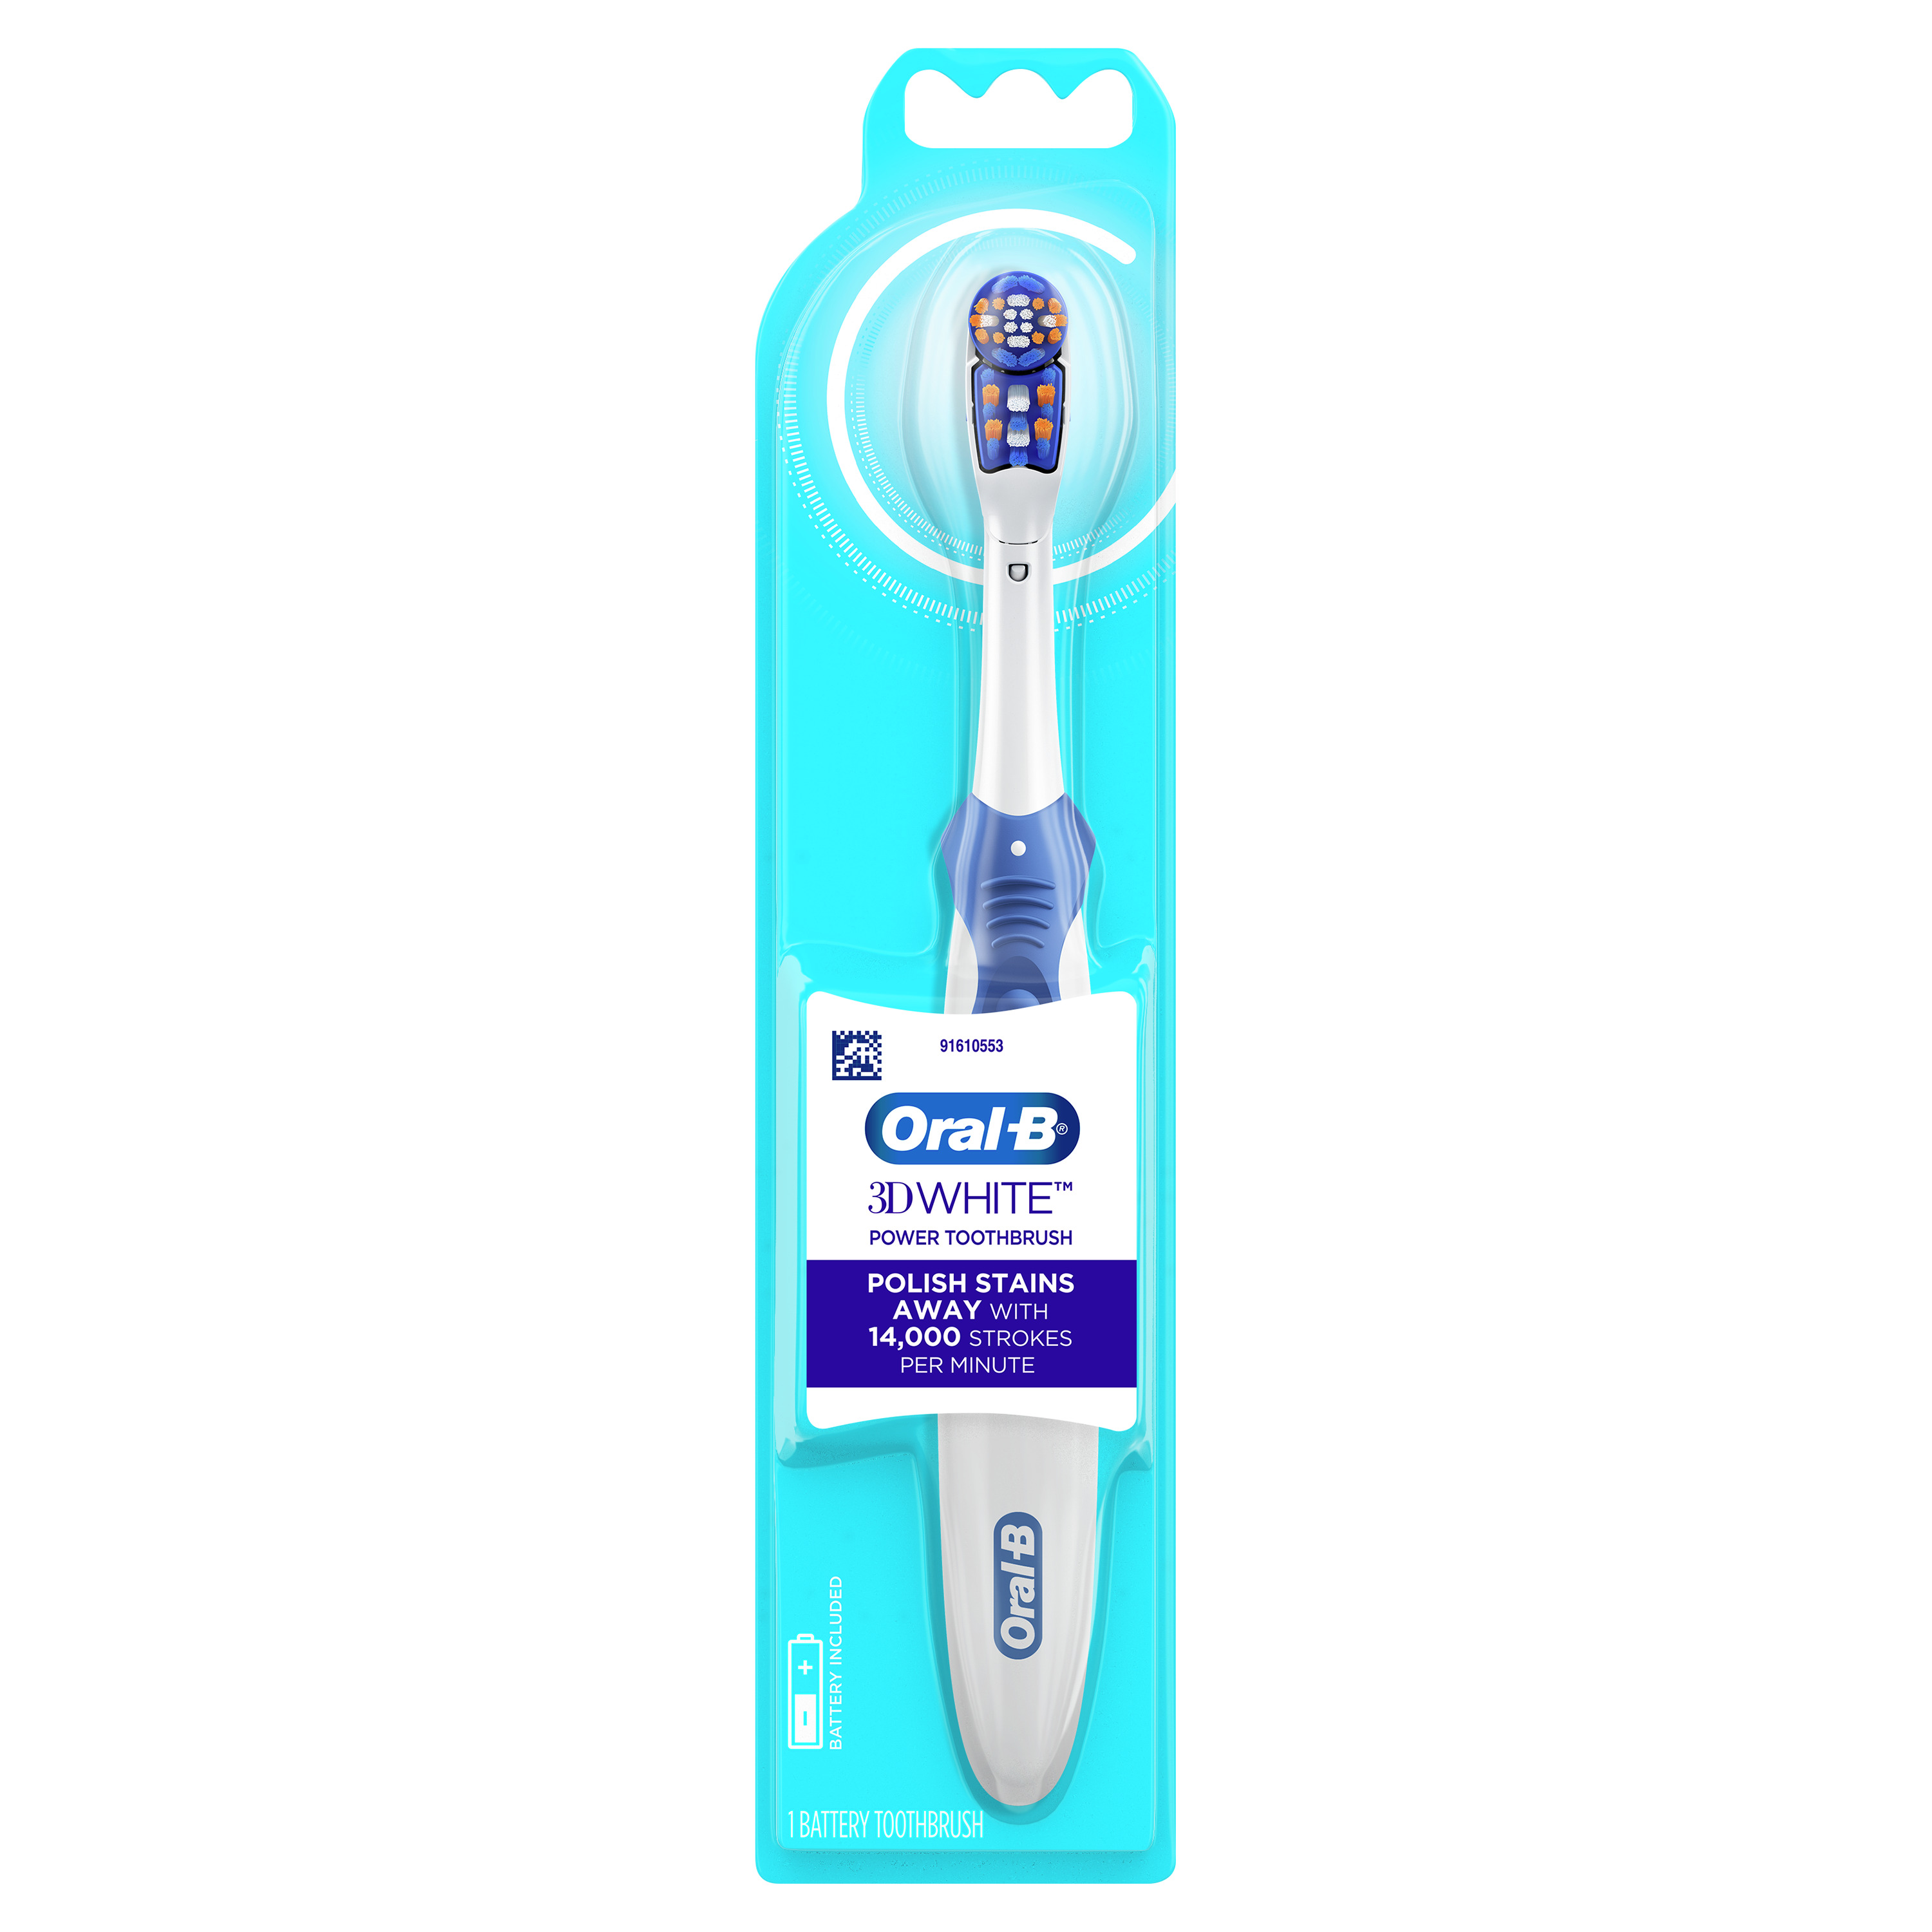 Oral-B 3D White Battery Toothbrush, 1 Count, Colors May Vary, for Adults and Children 3+ - image 1 of 9